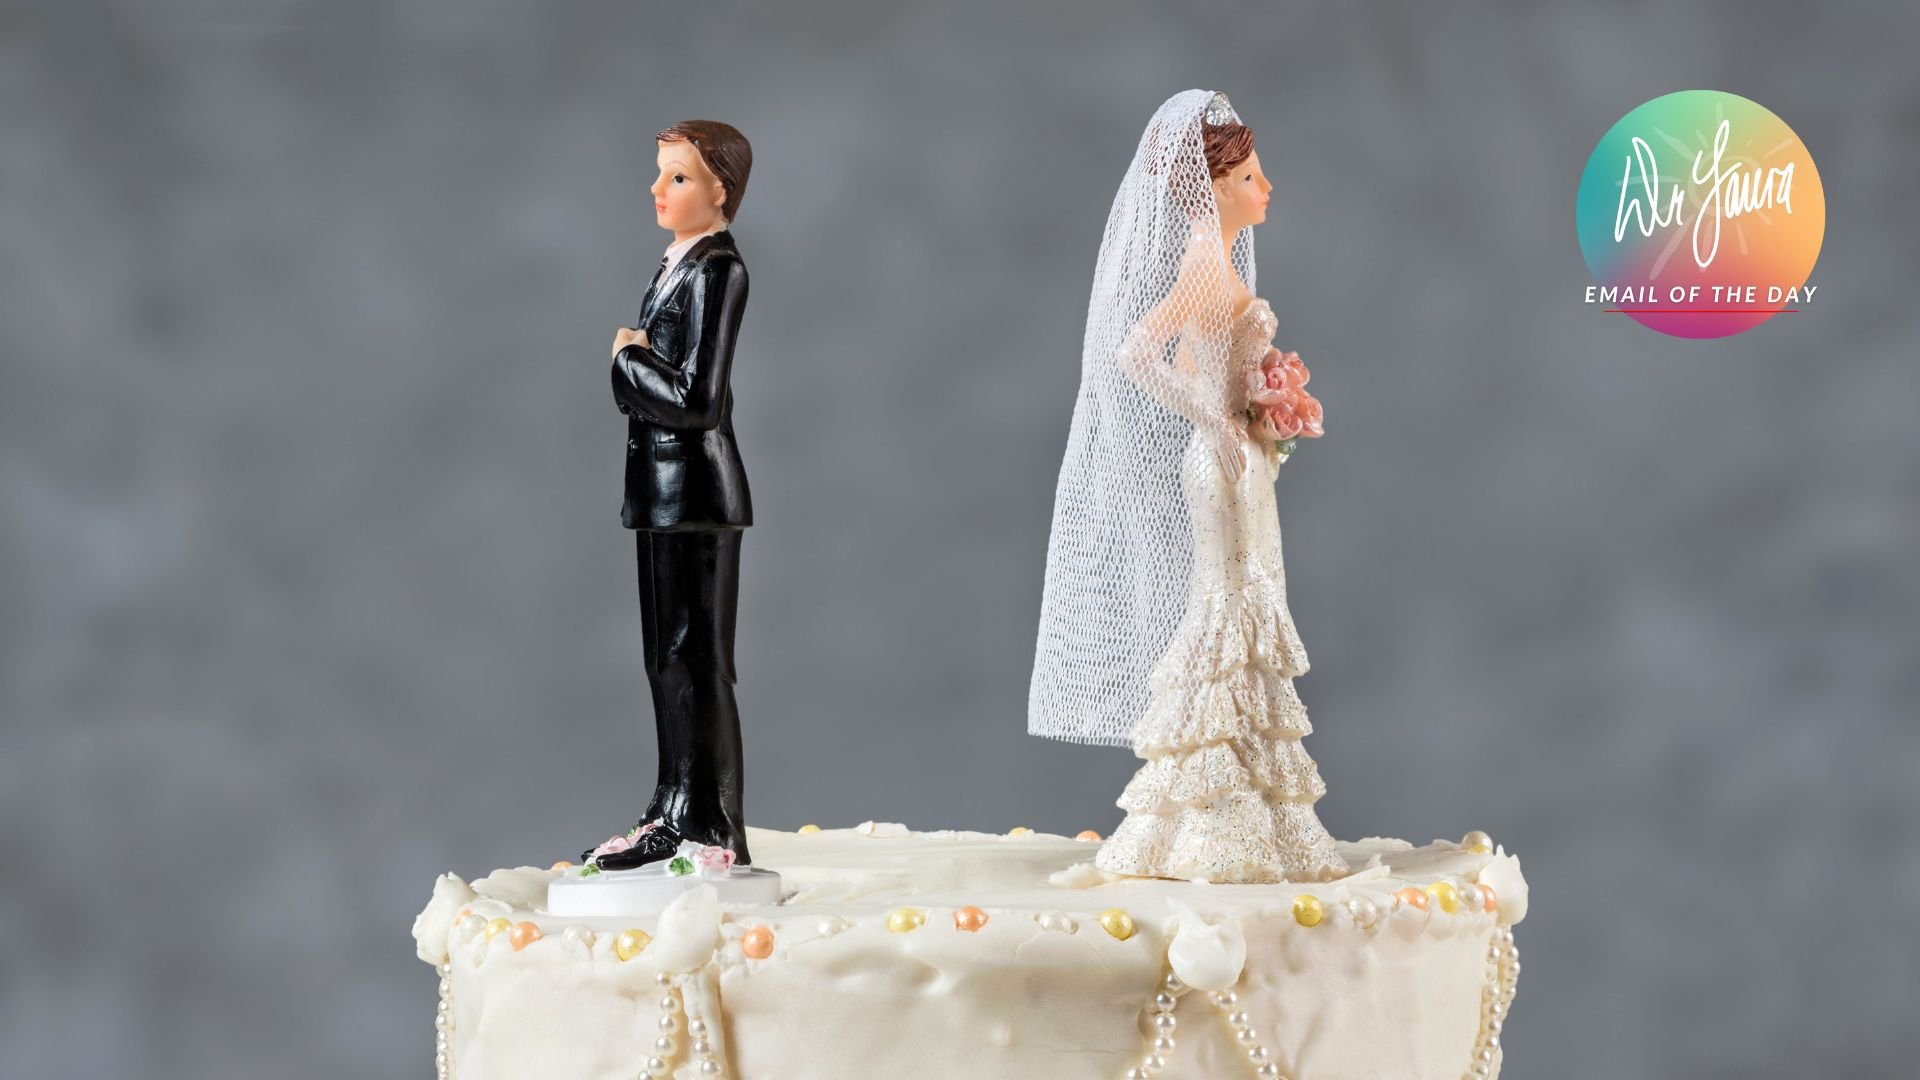 Email of the Day: My Marriage Was Headed in the Wrong Direction